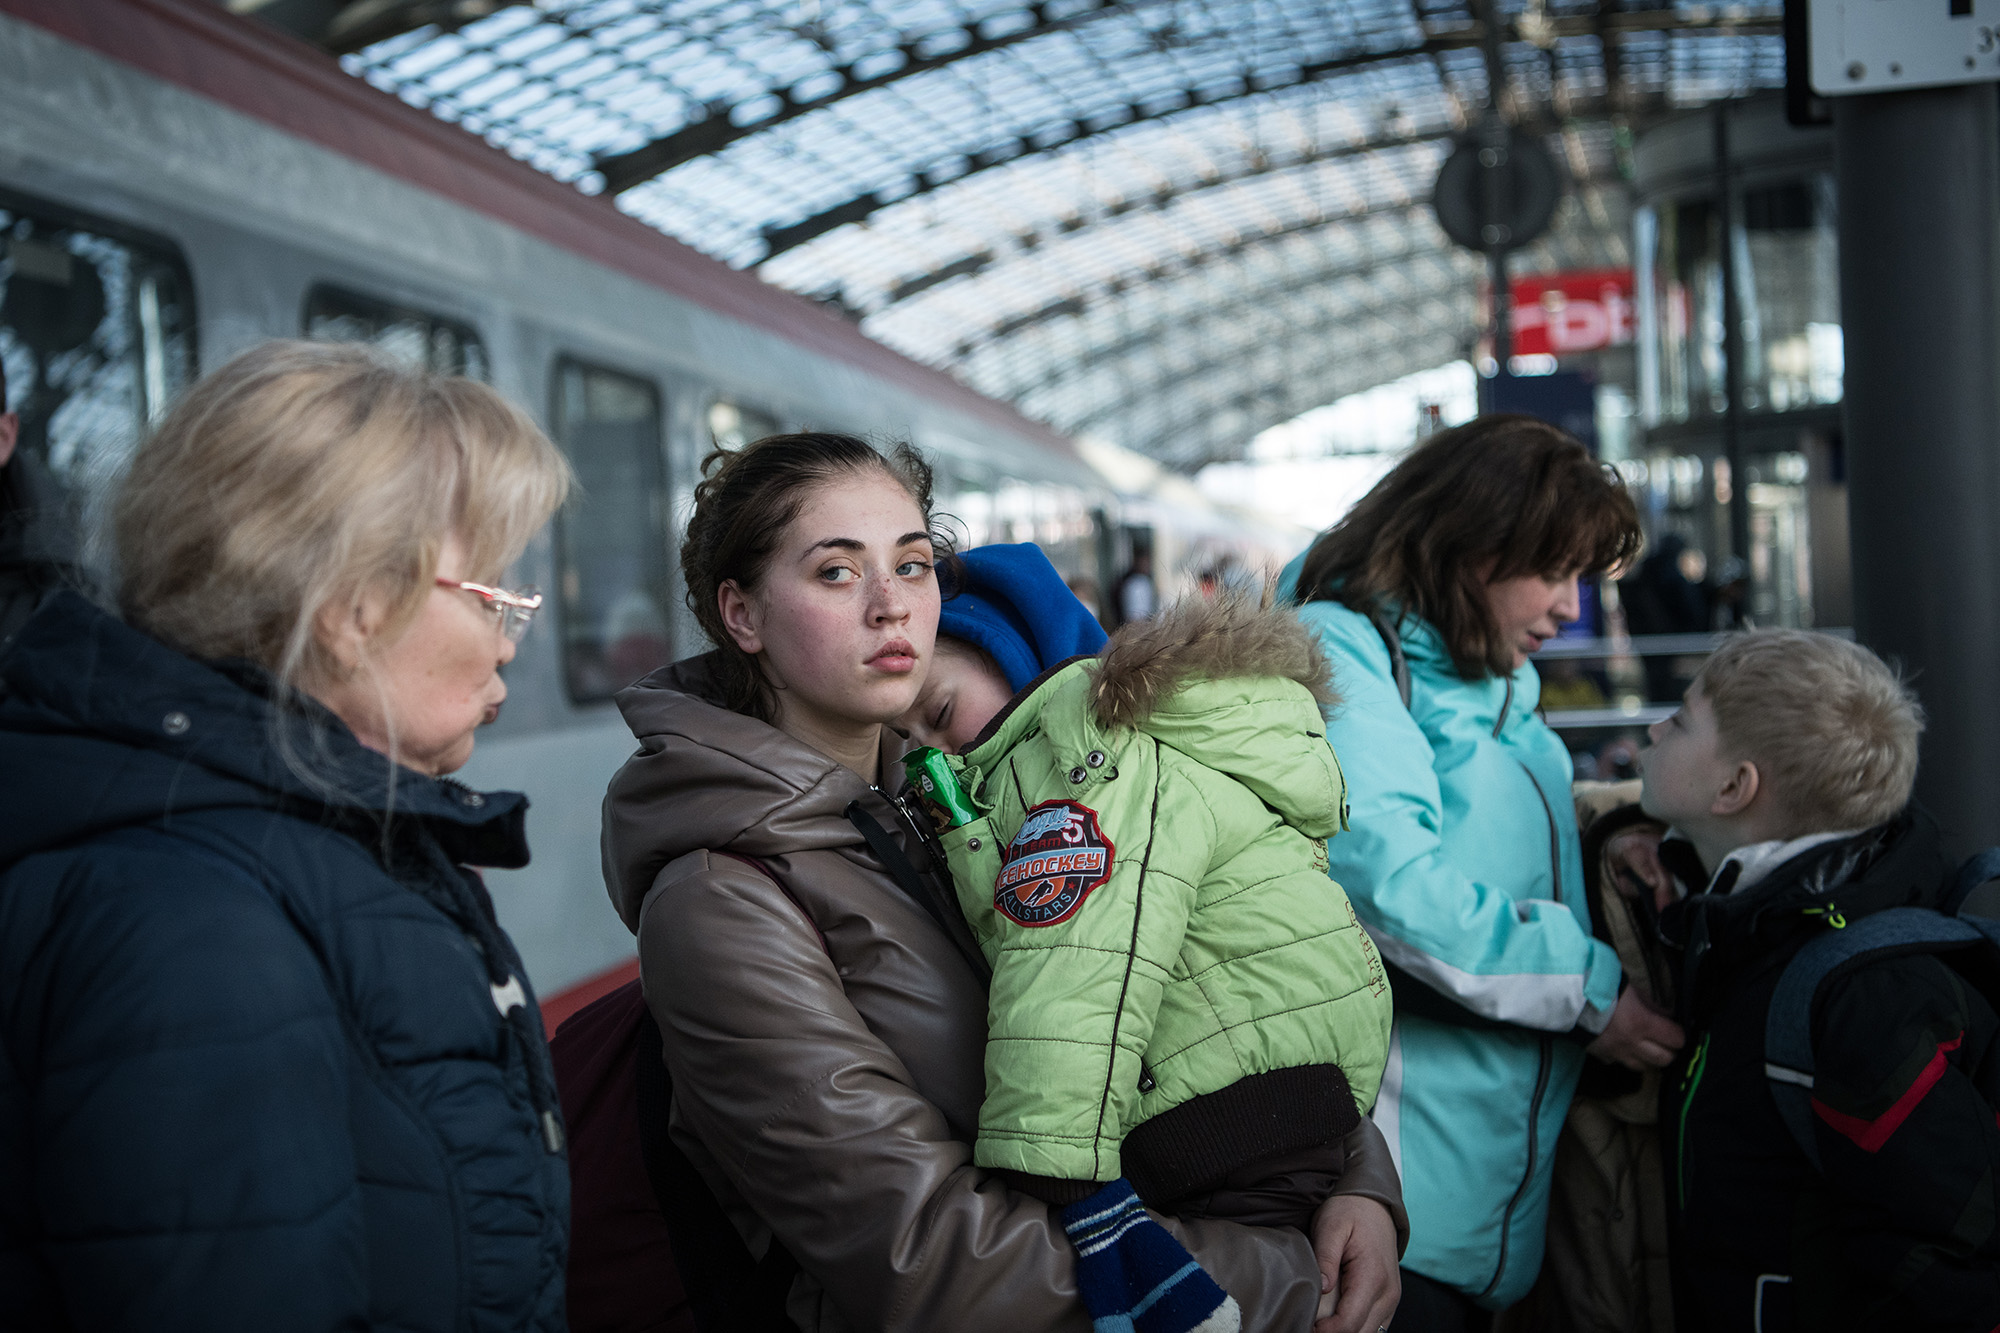 People fleeing war-torn Ukraine arrive on a train from Poland at the city's Hauptbahnhof main railway station on March 9 in Berlin, Germany. 